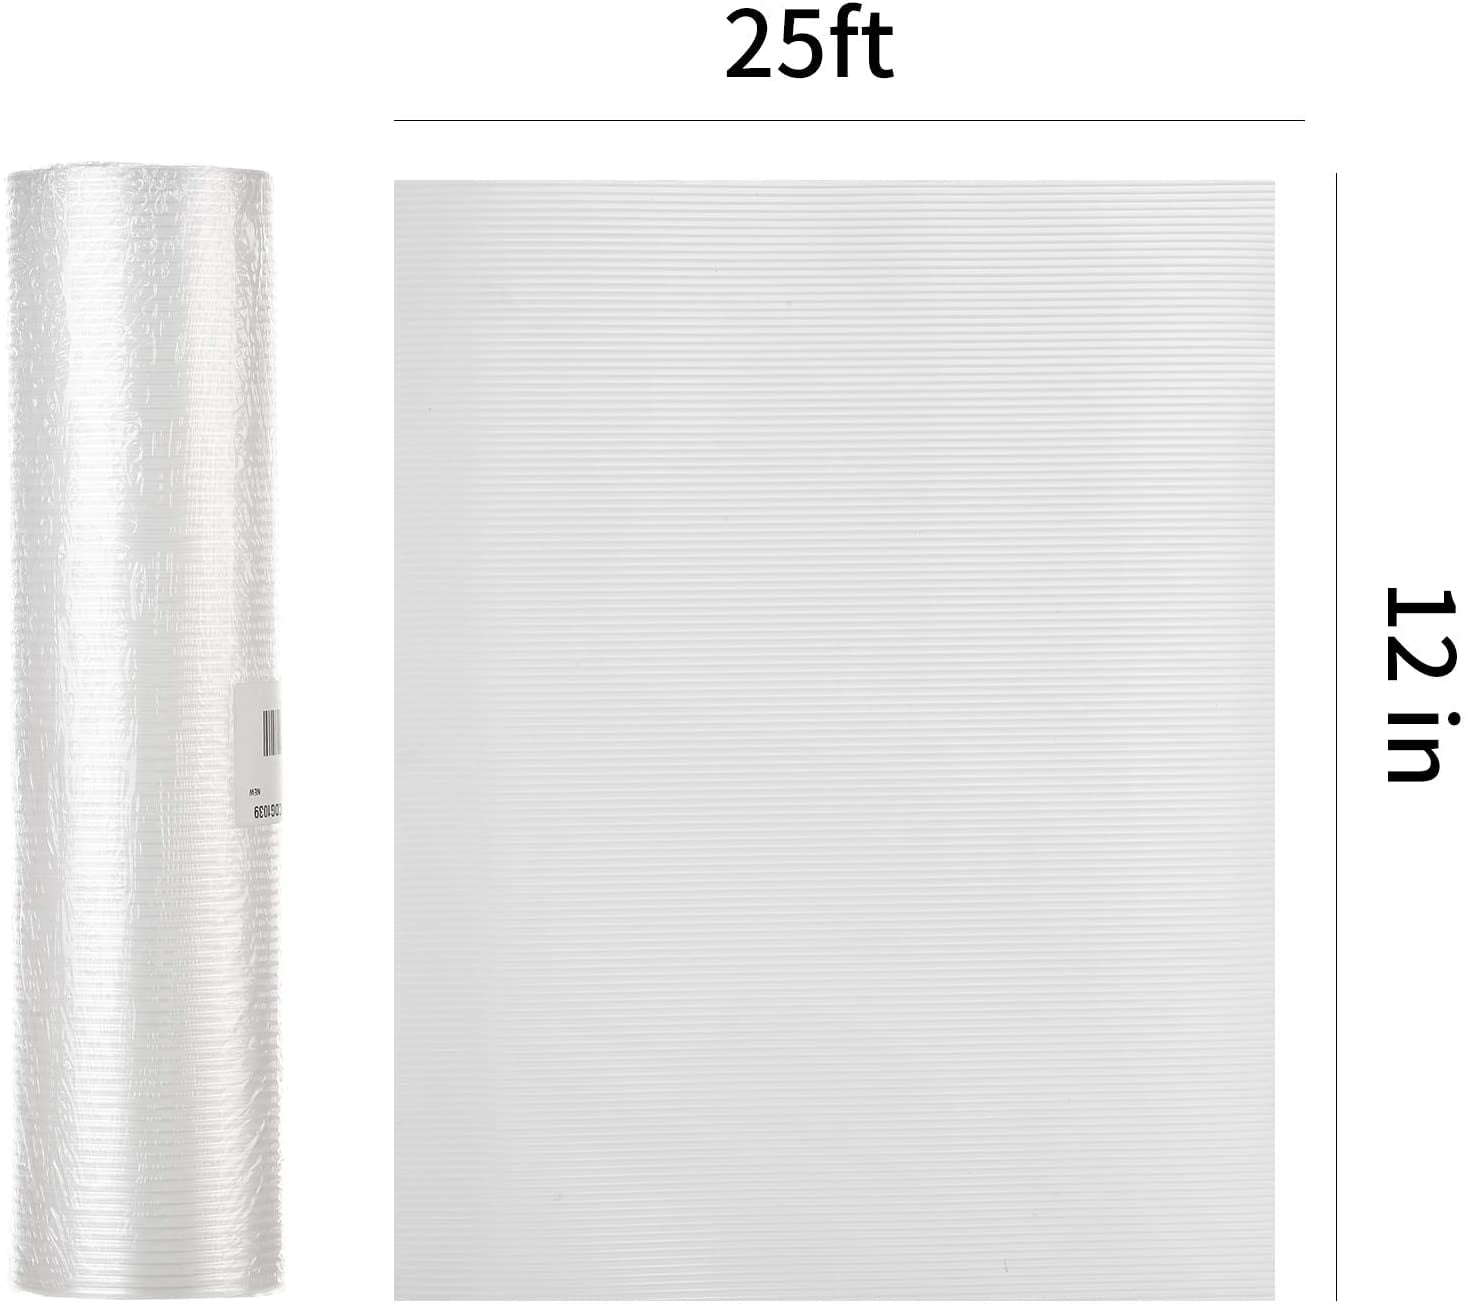 FEXIA Shelf Liners for Kitchen Cabinets, 12 Inch X 25 FT(300 Inch